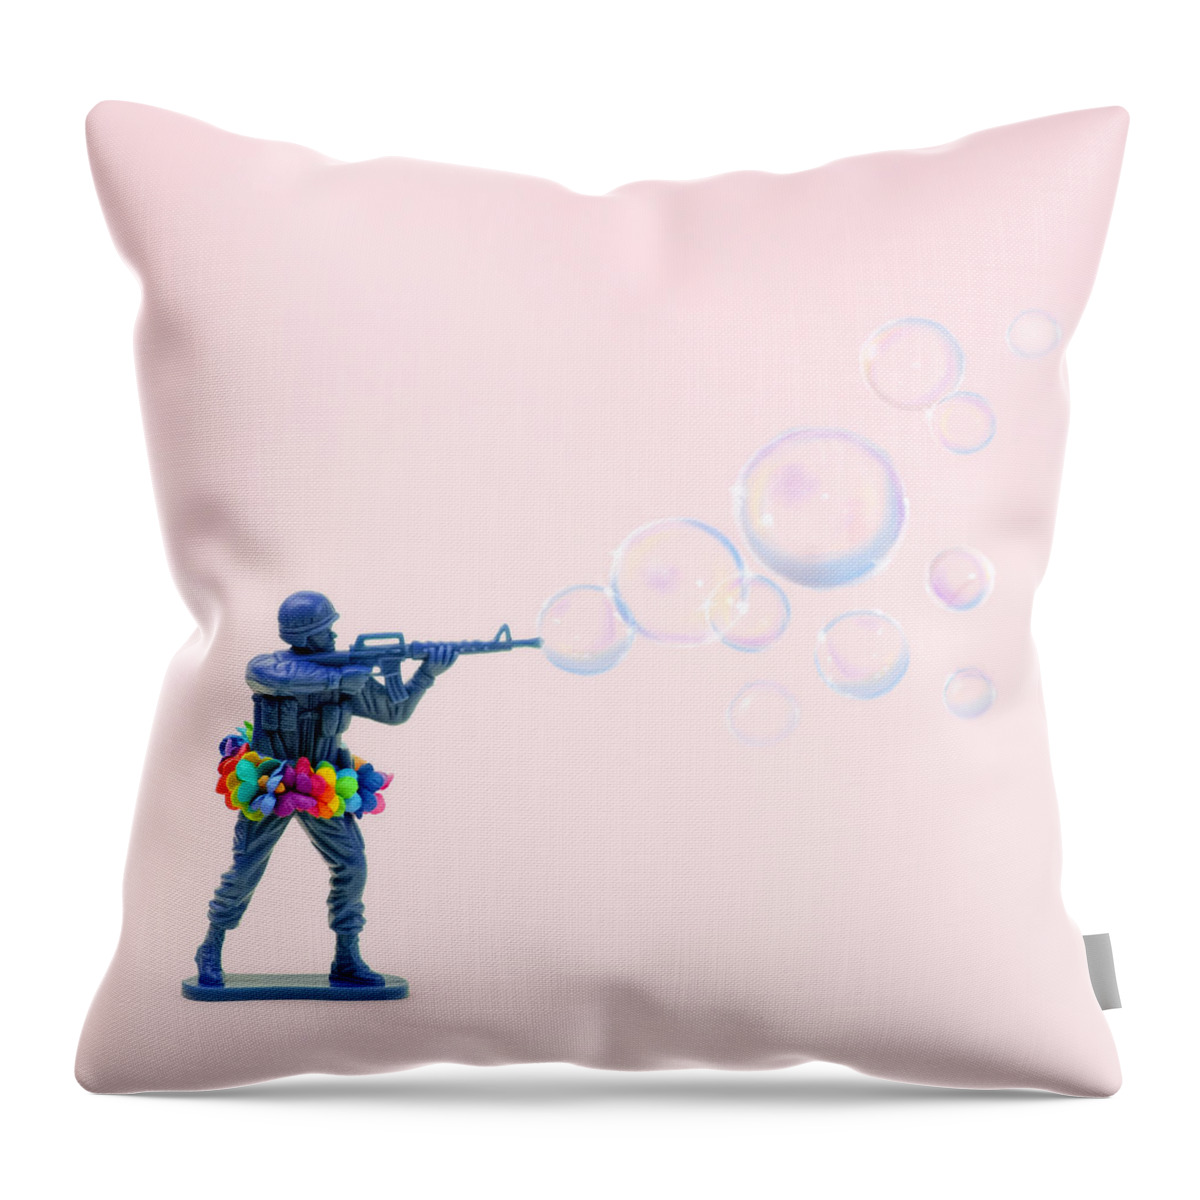 Soldier Pillow